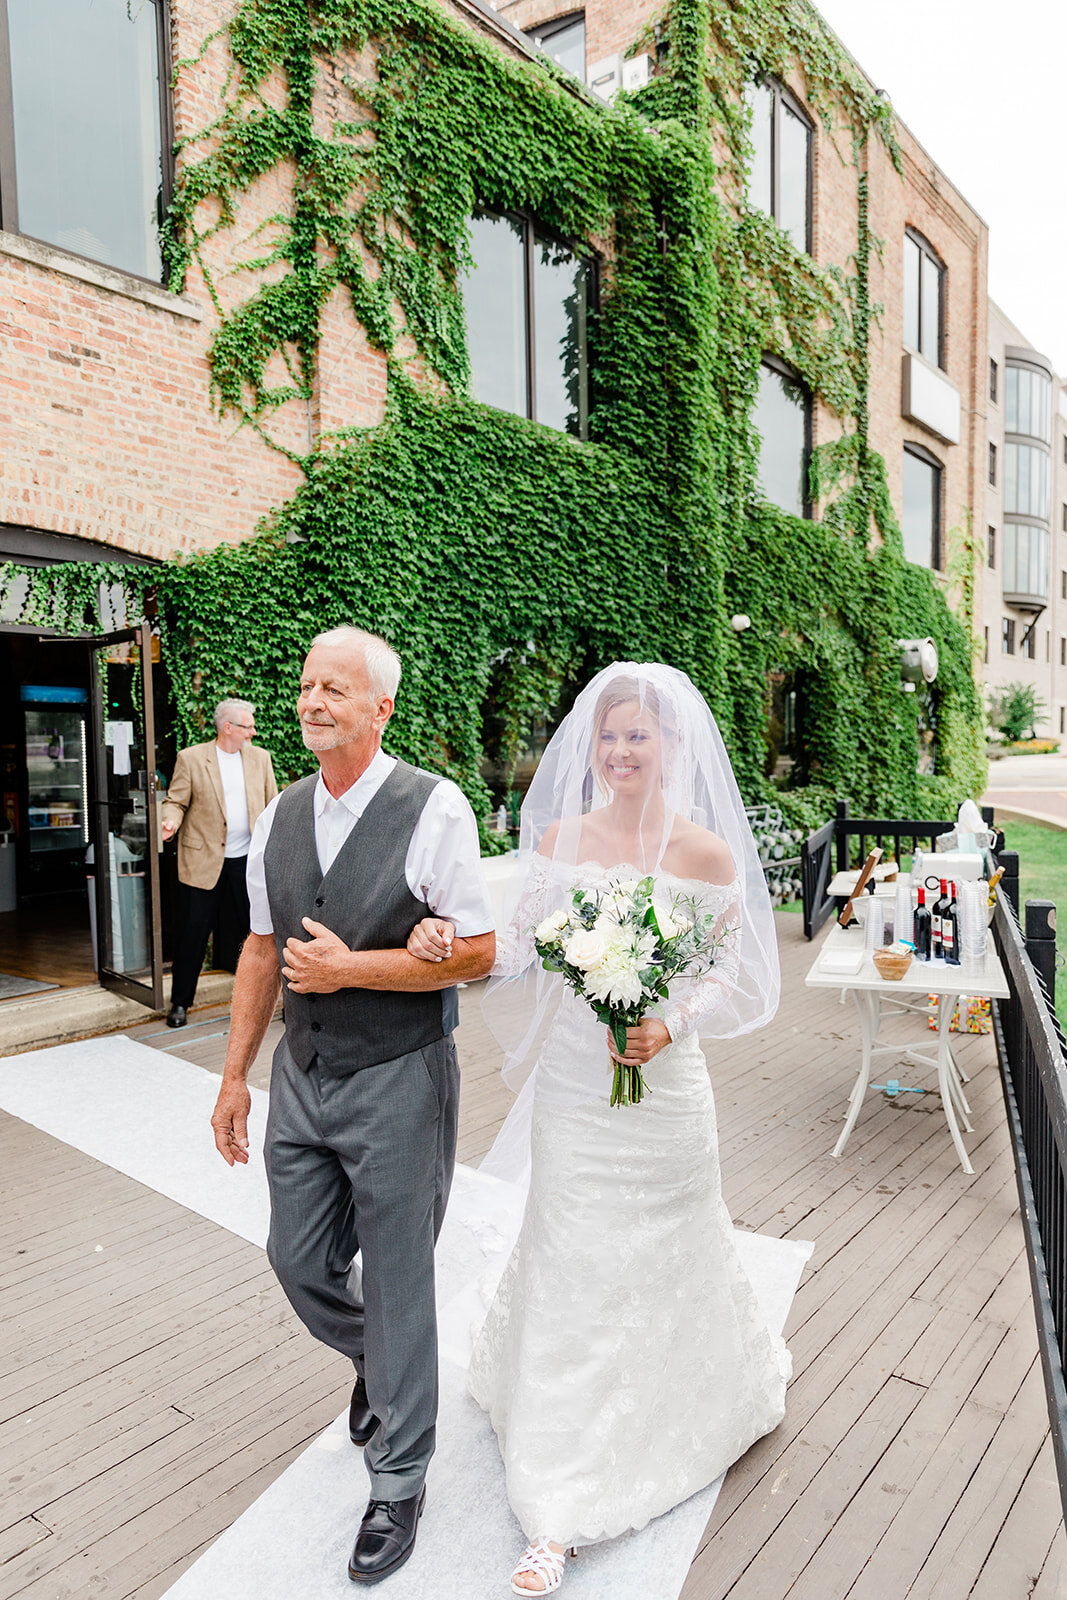 Romantic Intimate Wedding at a Coffee Shop captured by Expedition Joy on CHI thee WED